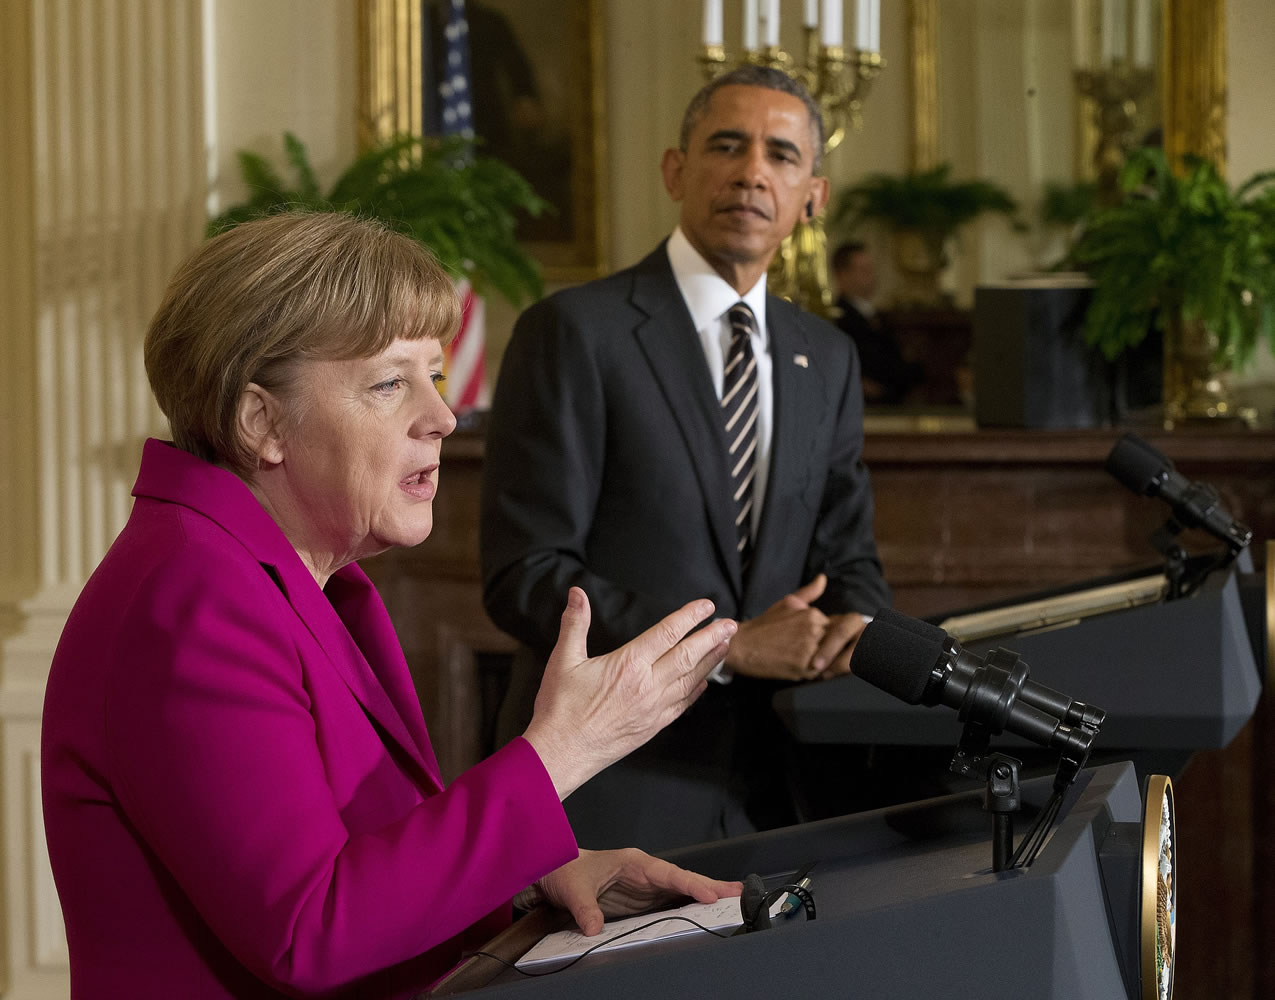 President Barack Obama and German Chancellor Angela Merkel participate in a joint news conference at the White House.